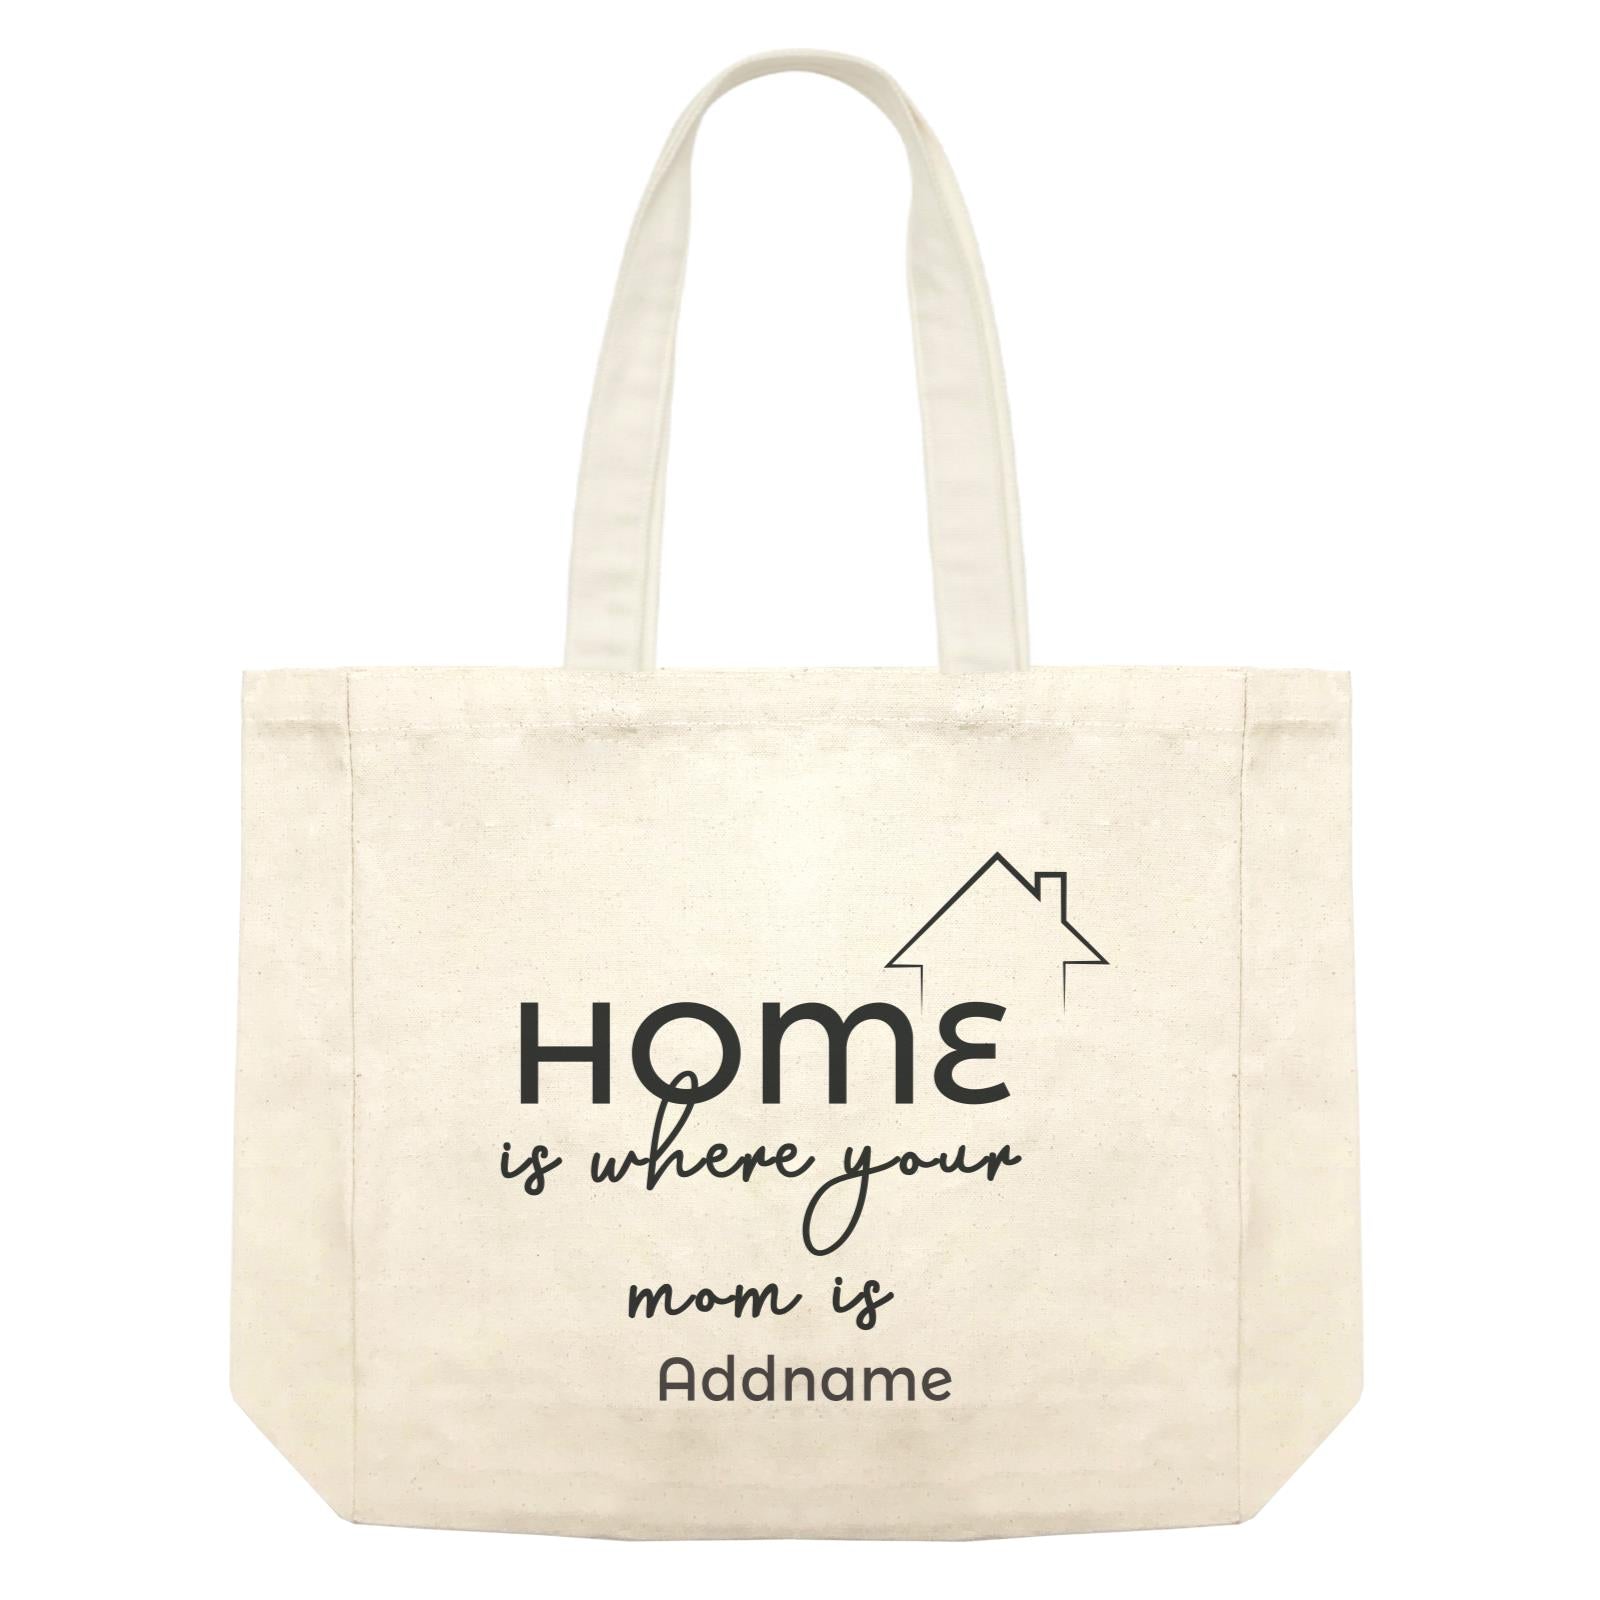 Girl Boss Quotes Home Is Where Your Mom Is Addname Shopping Bag